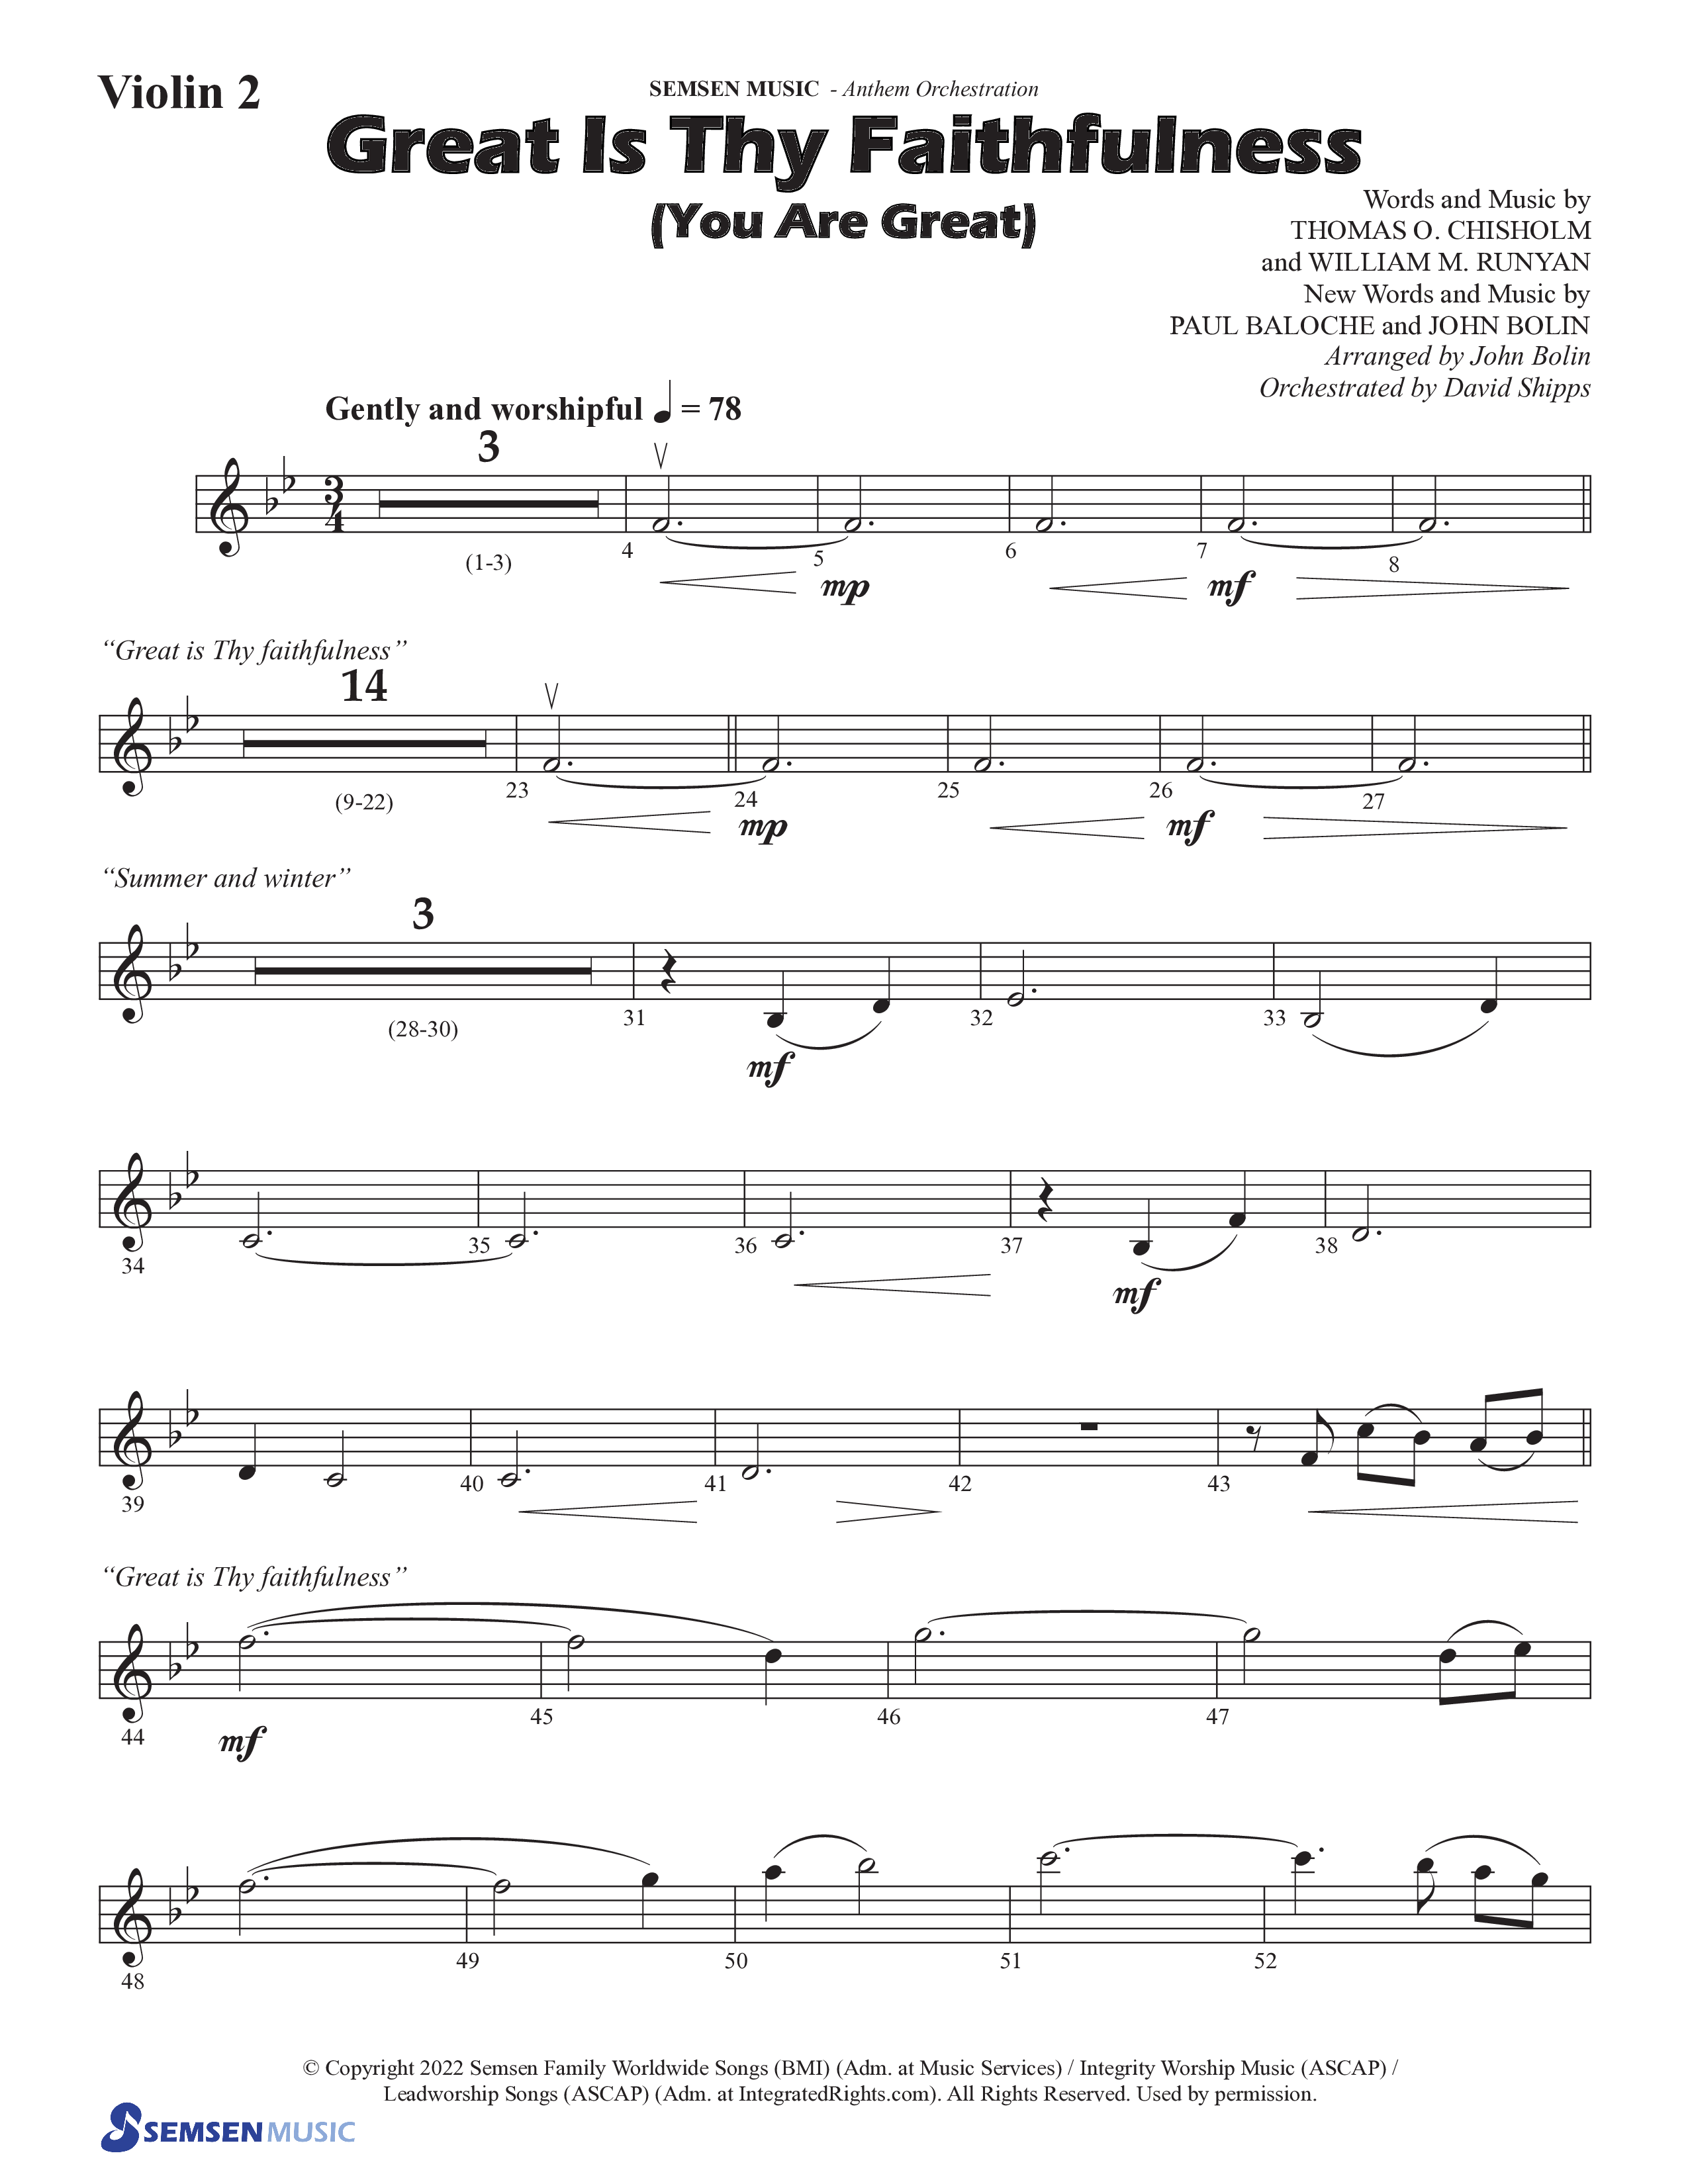 Great Is Thy Faithfulness (You Are Great) (Choral Anthem SATB) Violin 2 (Semsen Music / Arr. John Bolin / Orch. David Shipps)